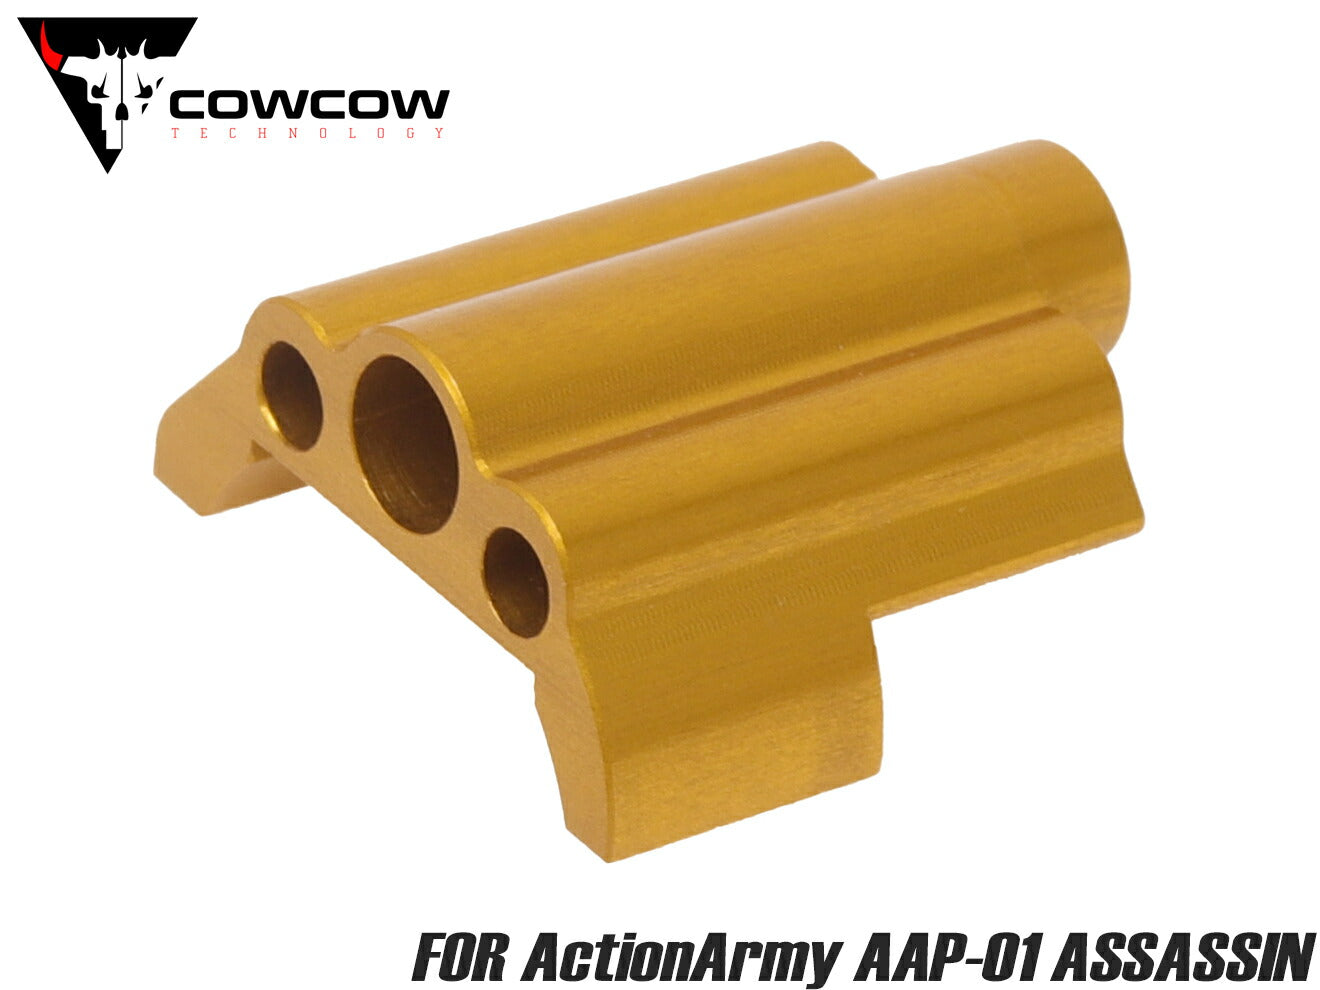 –　COWCOW　CNC　ActionArmy　ミリタリーベース　TECHNOLOGY　A7075　ノズルブロック　BASE　for　AAP-01　ミリタリーベース　MILITARY